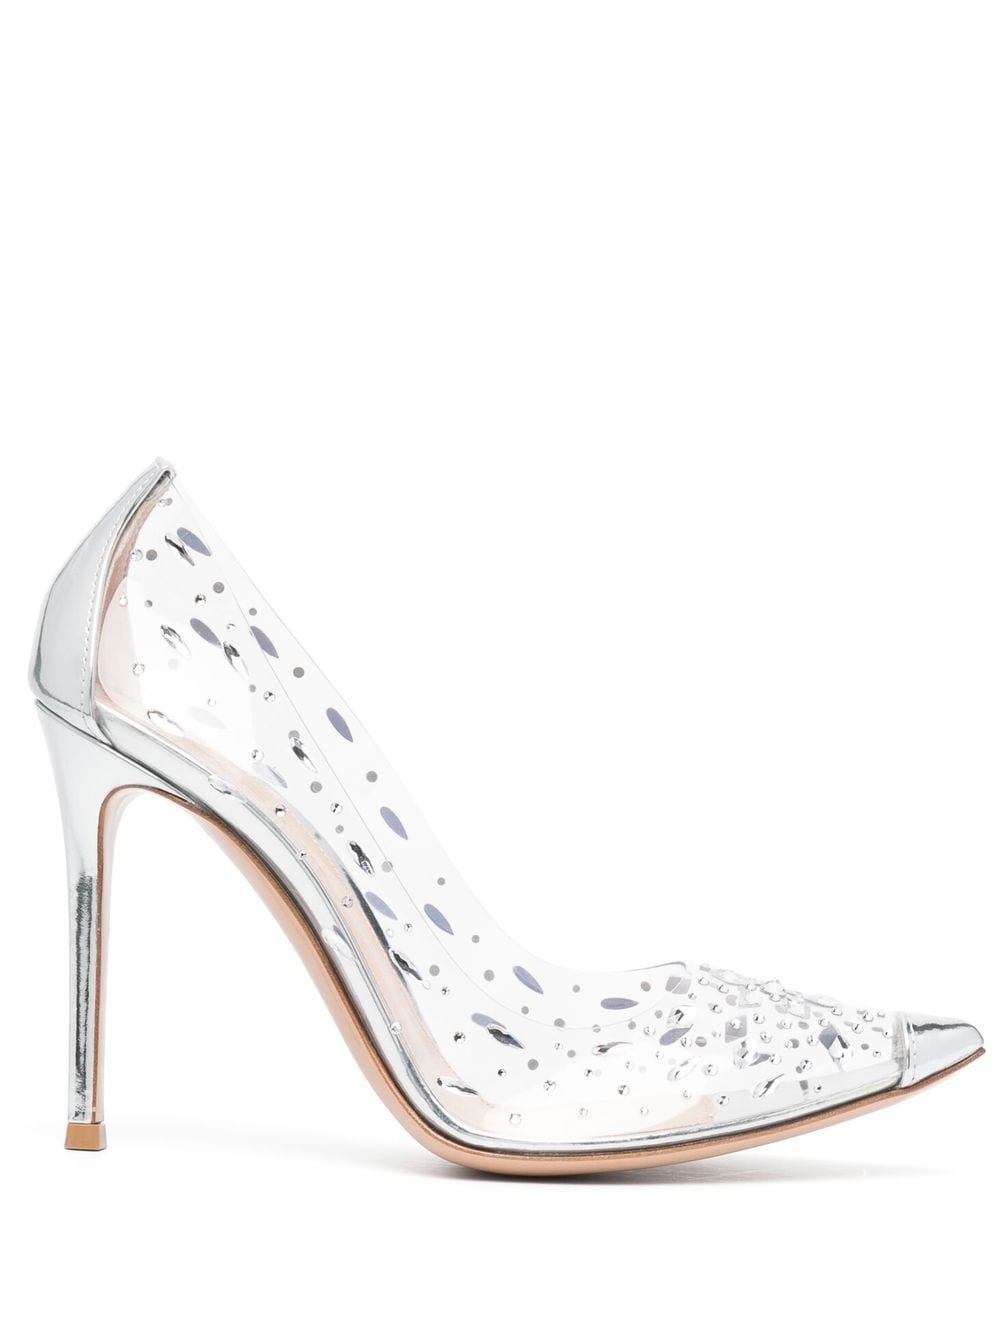 Gianvito Rossi Halley 105mm crystal-embellished pumps - White von Gianvito Rossi